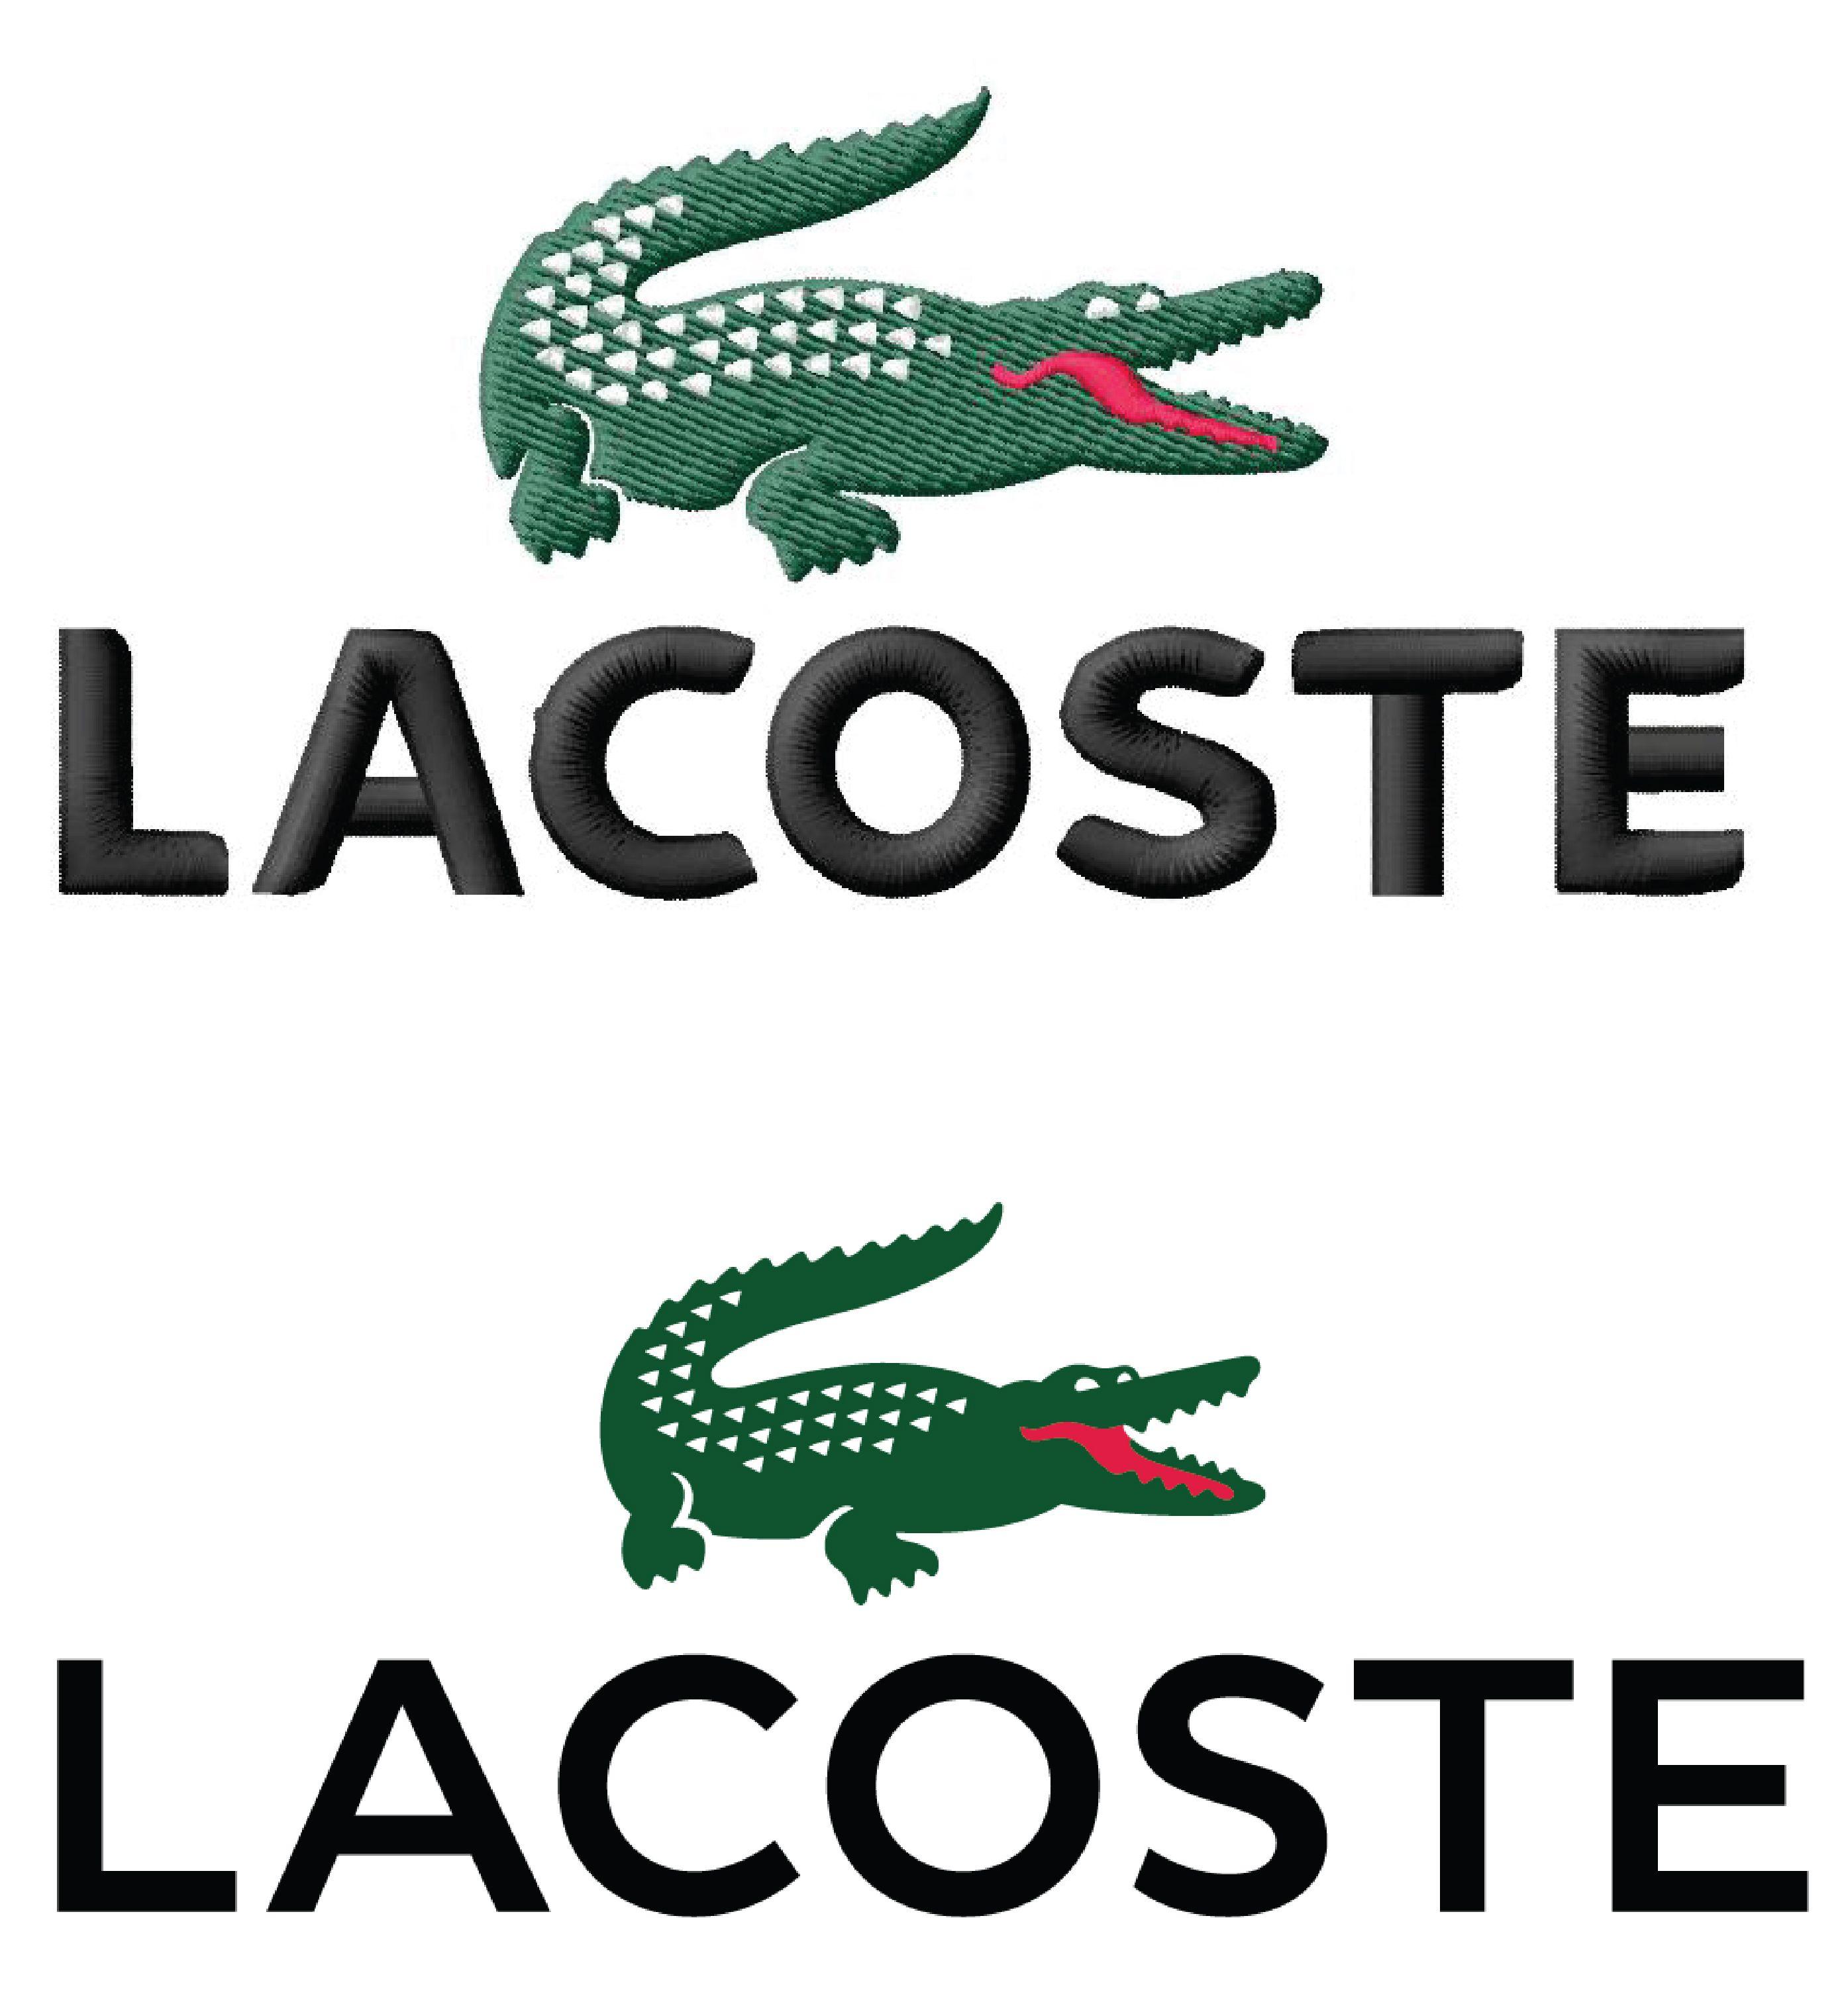 Lacoste Logo - Lacoste Logo, Lacoste Symbol Meaning, History and Evolution